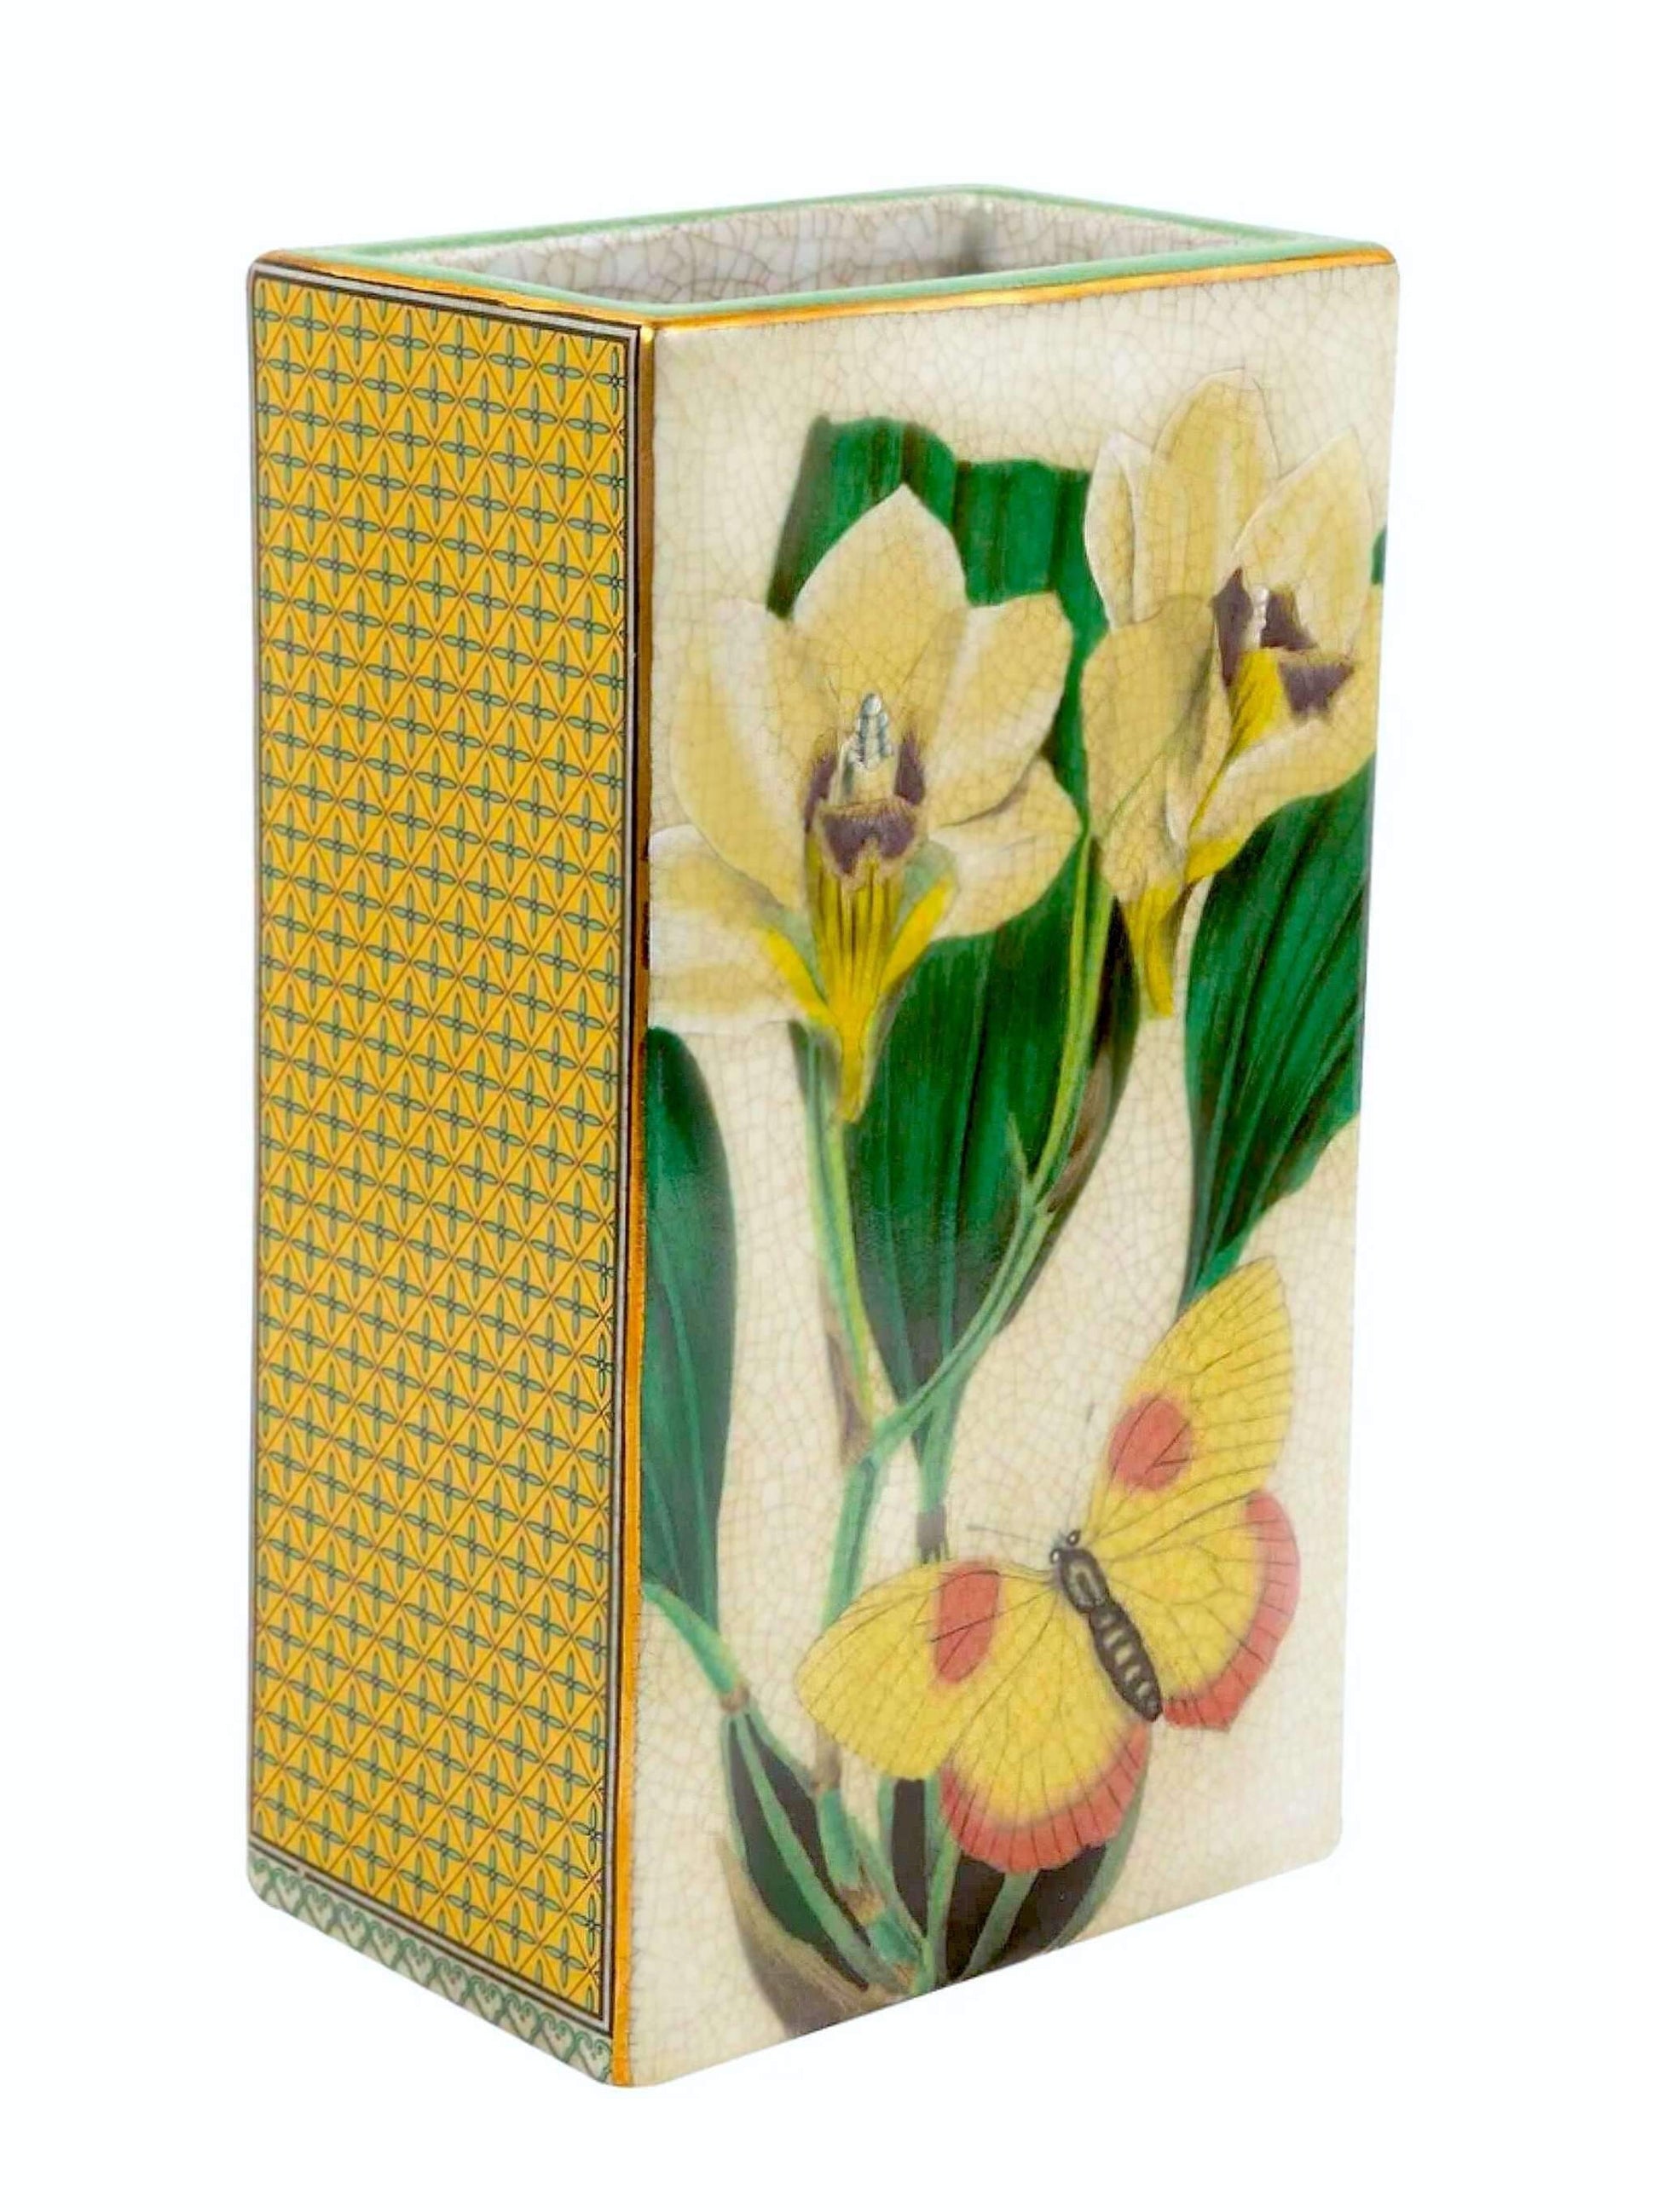 Solid Porcelain Vase Este Maxillara Yellow & Green by Creatively Active Minds